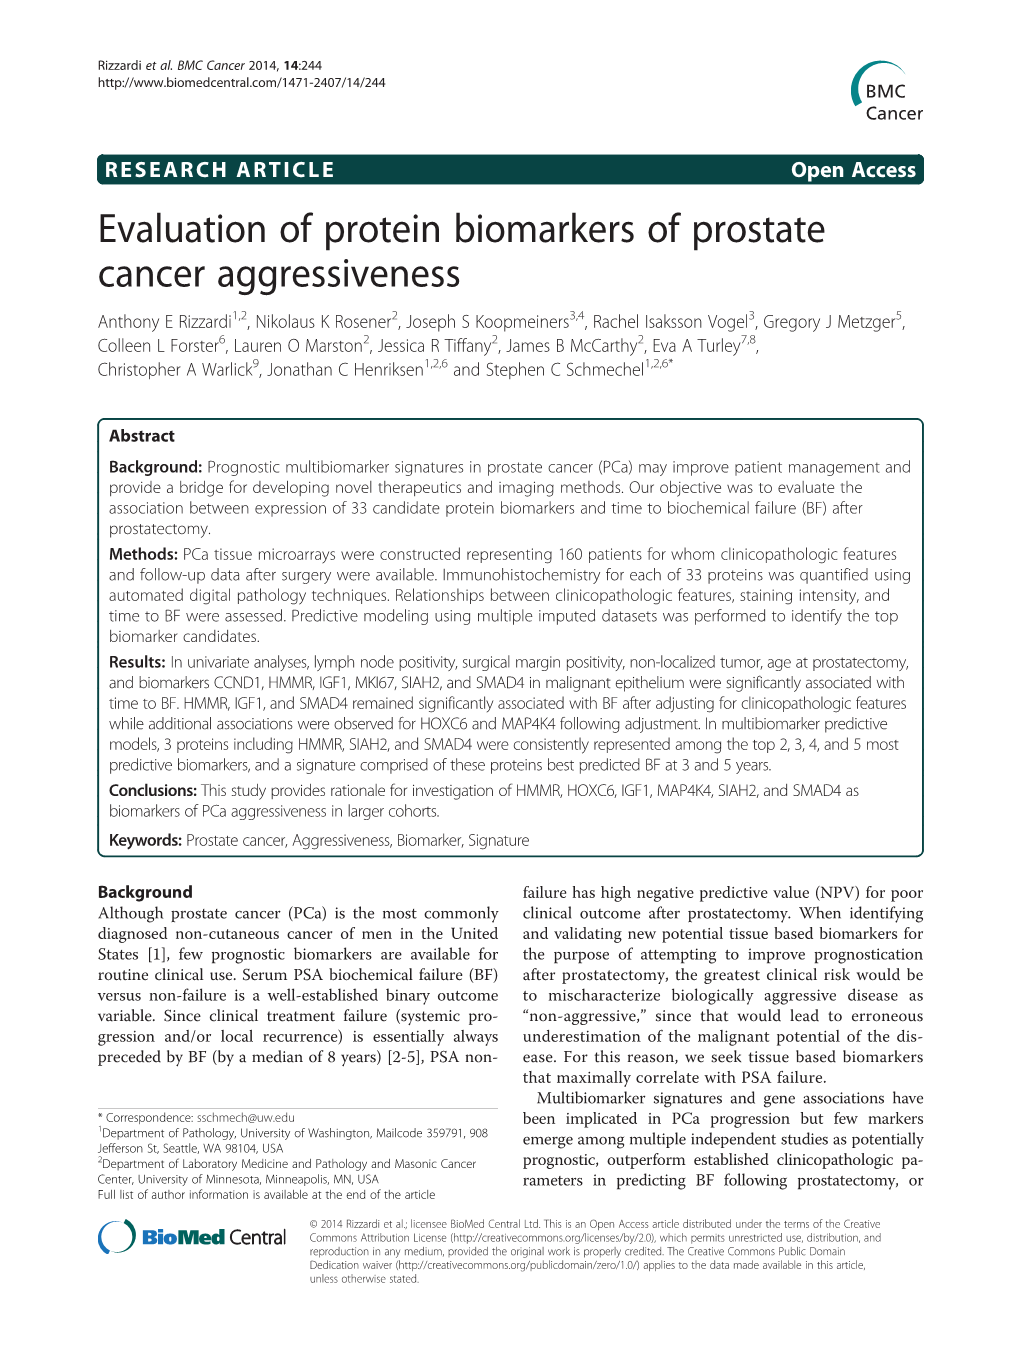 Evaluation of Protein Biomarkers of Prostate Cancer Aggressiveness